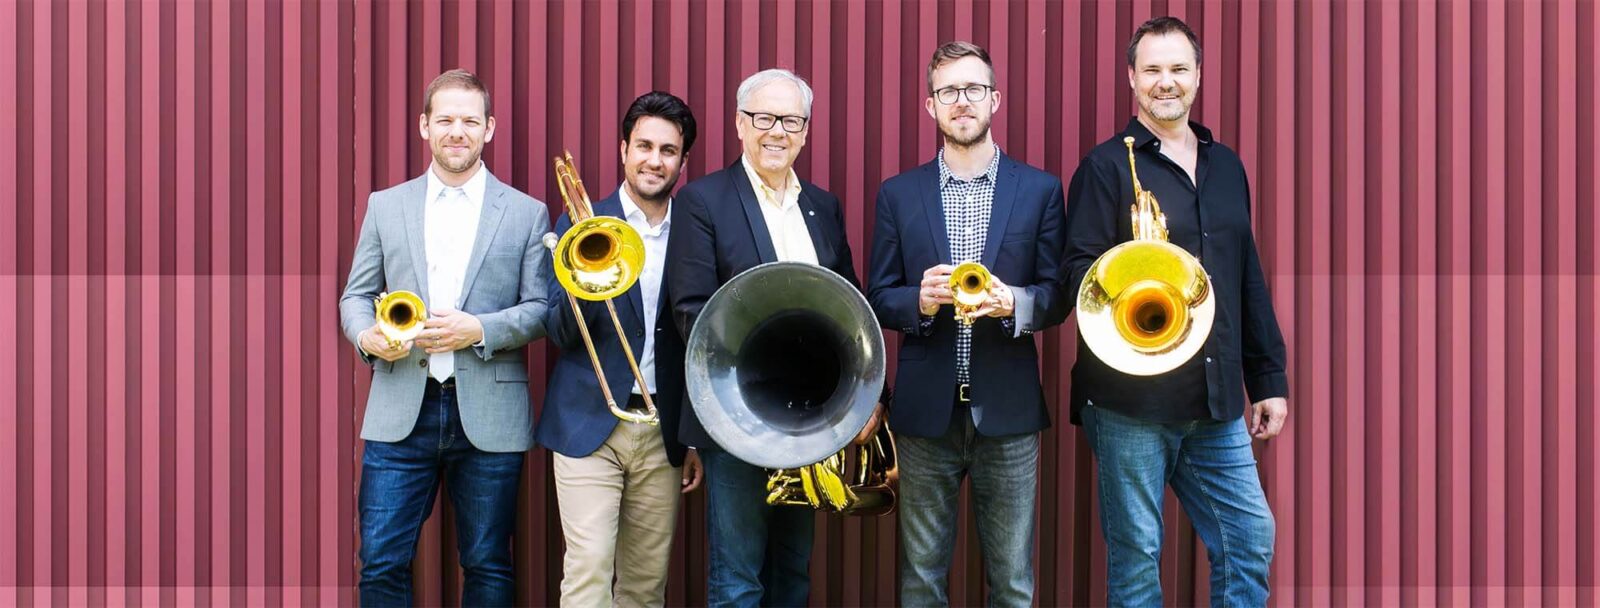 Canadian Brass with music instruments